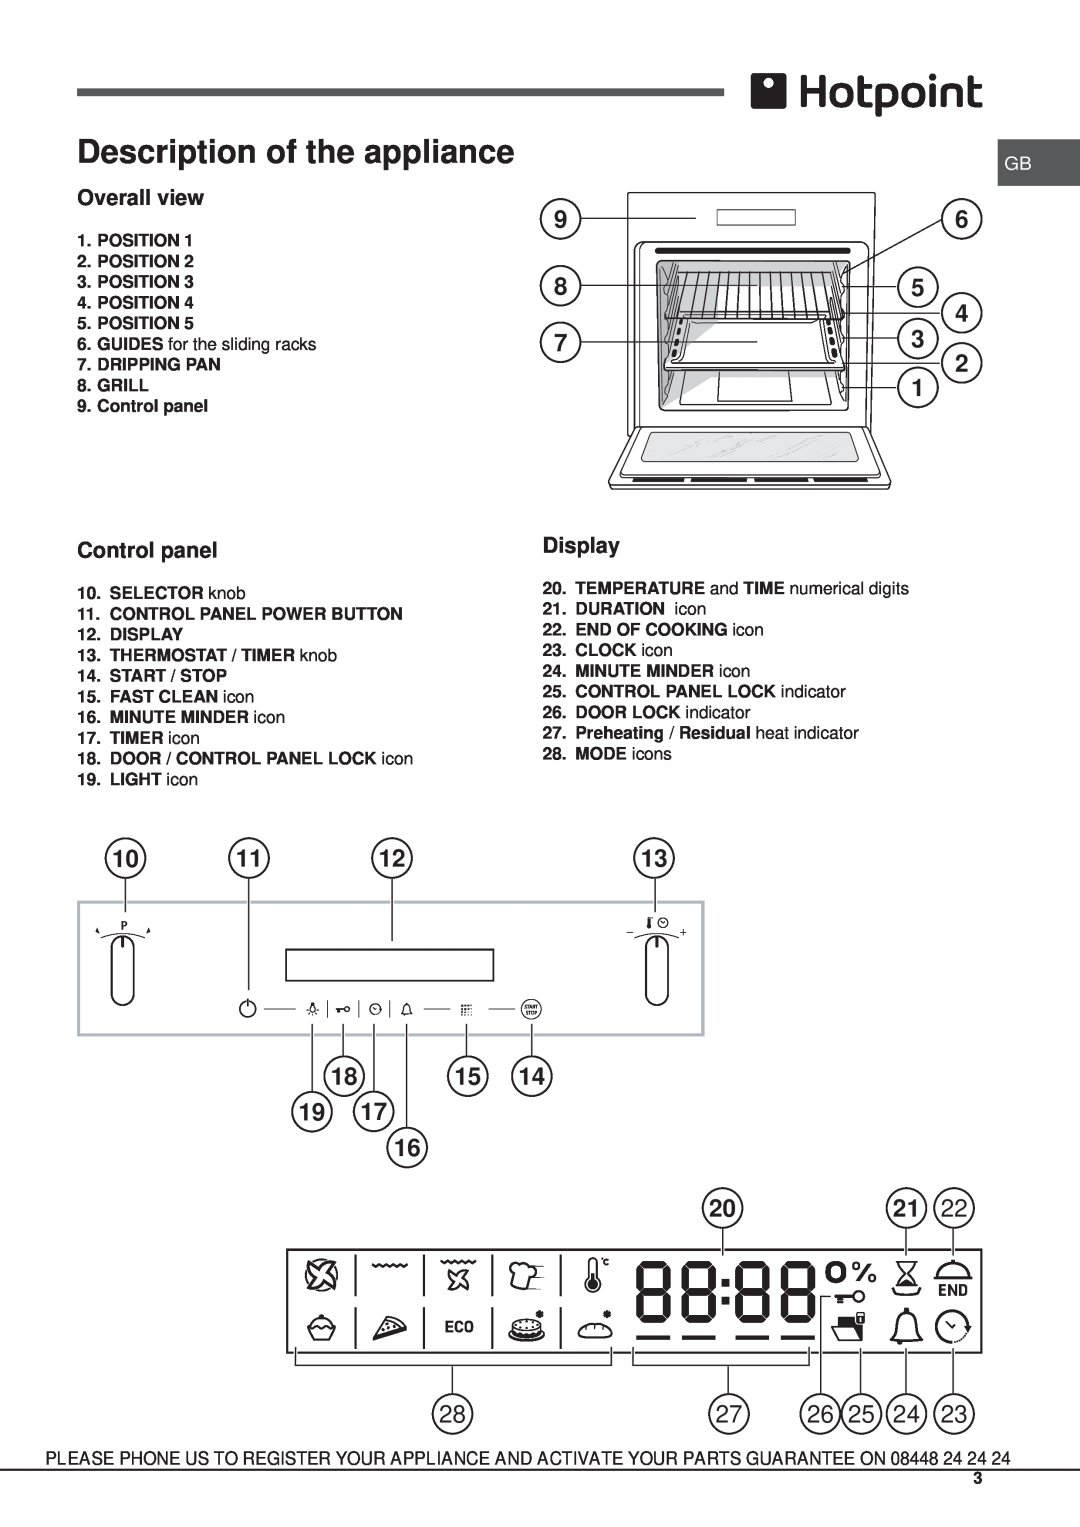 Hotpoint SX 896L PX S Description of the appliance, Overall view, Control panel, Display, Position, Dripping Pan, Grill 